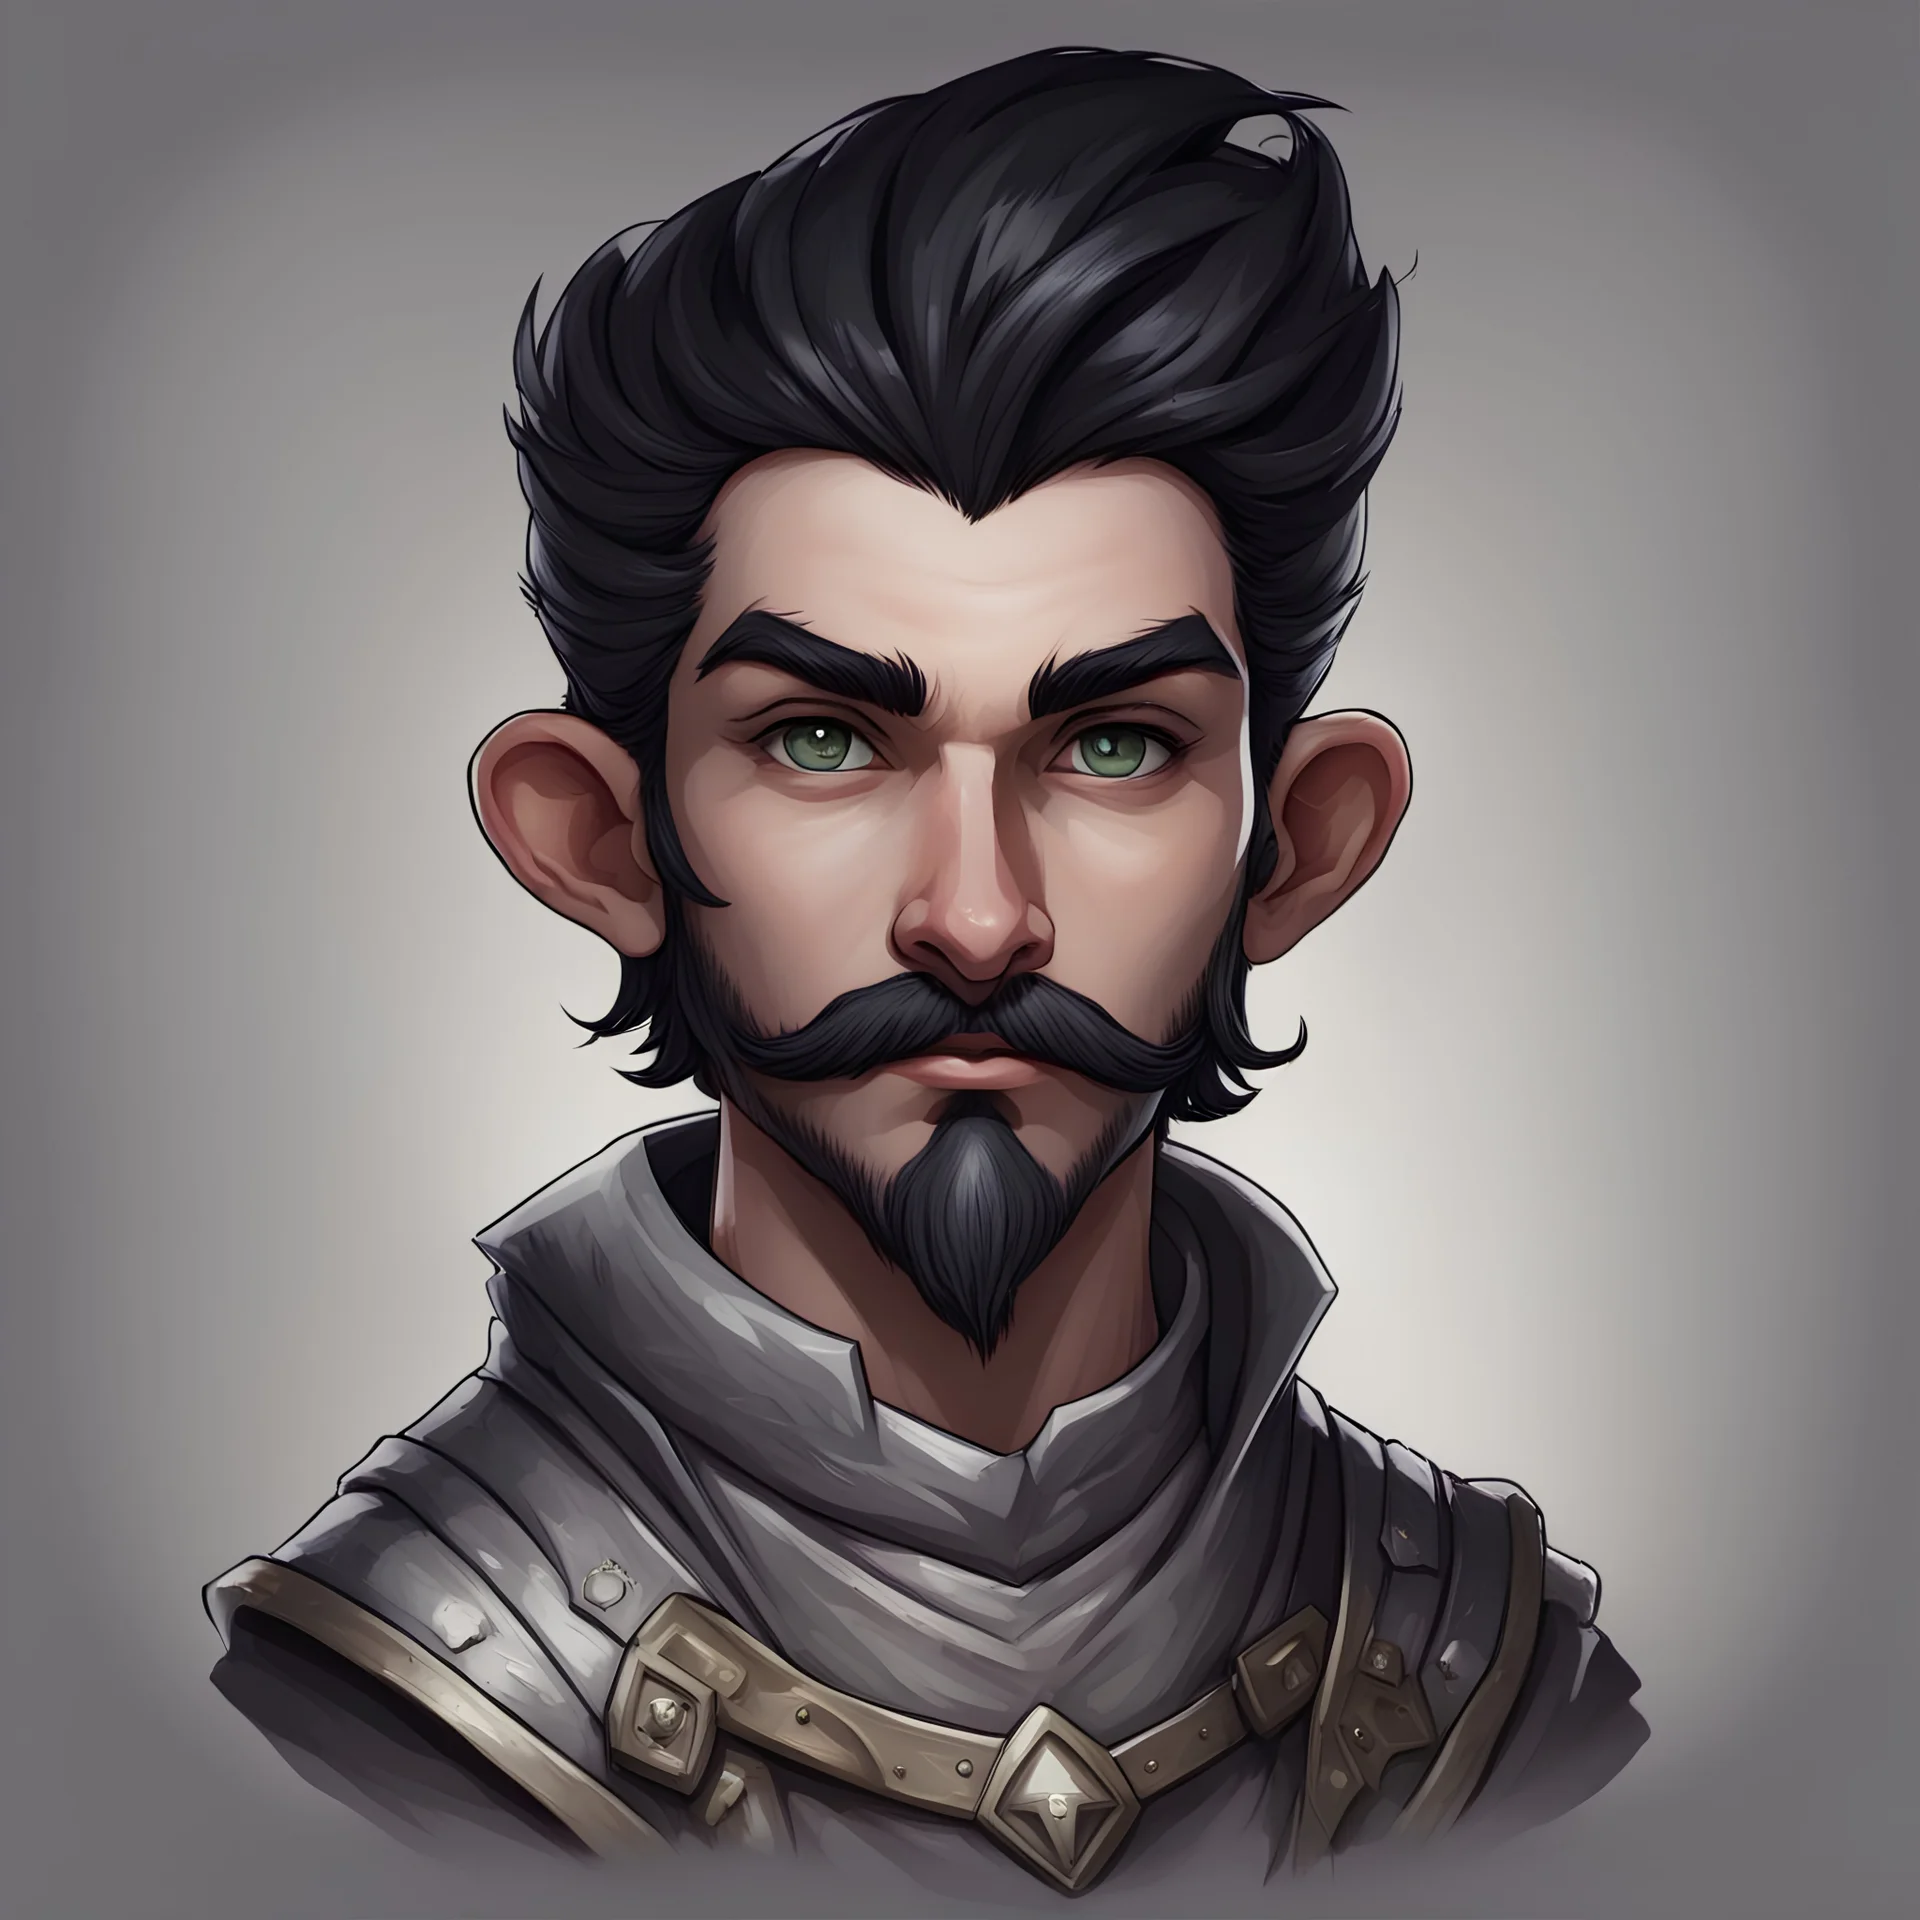 Generate a dungeons and dragons character portrait of the face of a male cleric of twilight handsome rock gnome blessed by the goddess Selune. He has black hair, eyebrows, moustache and goatee. He's 19 years old. His eyes are dark grey. His eyebrows must be the same color as his hair.